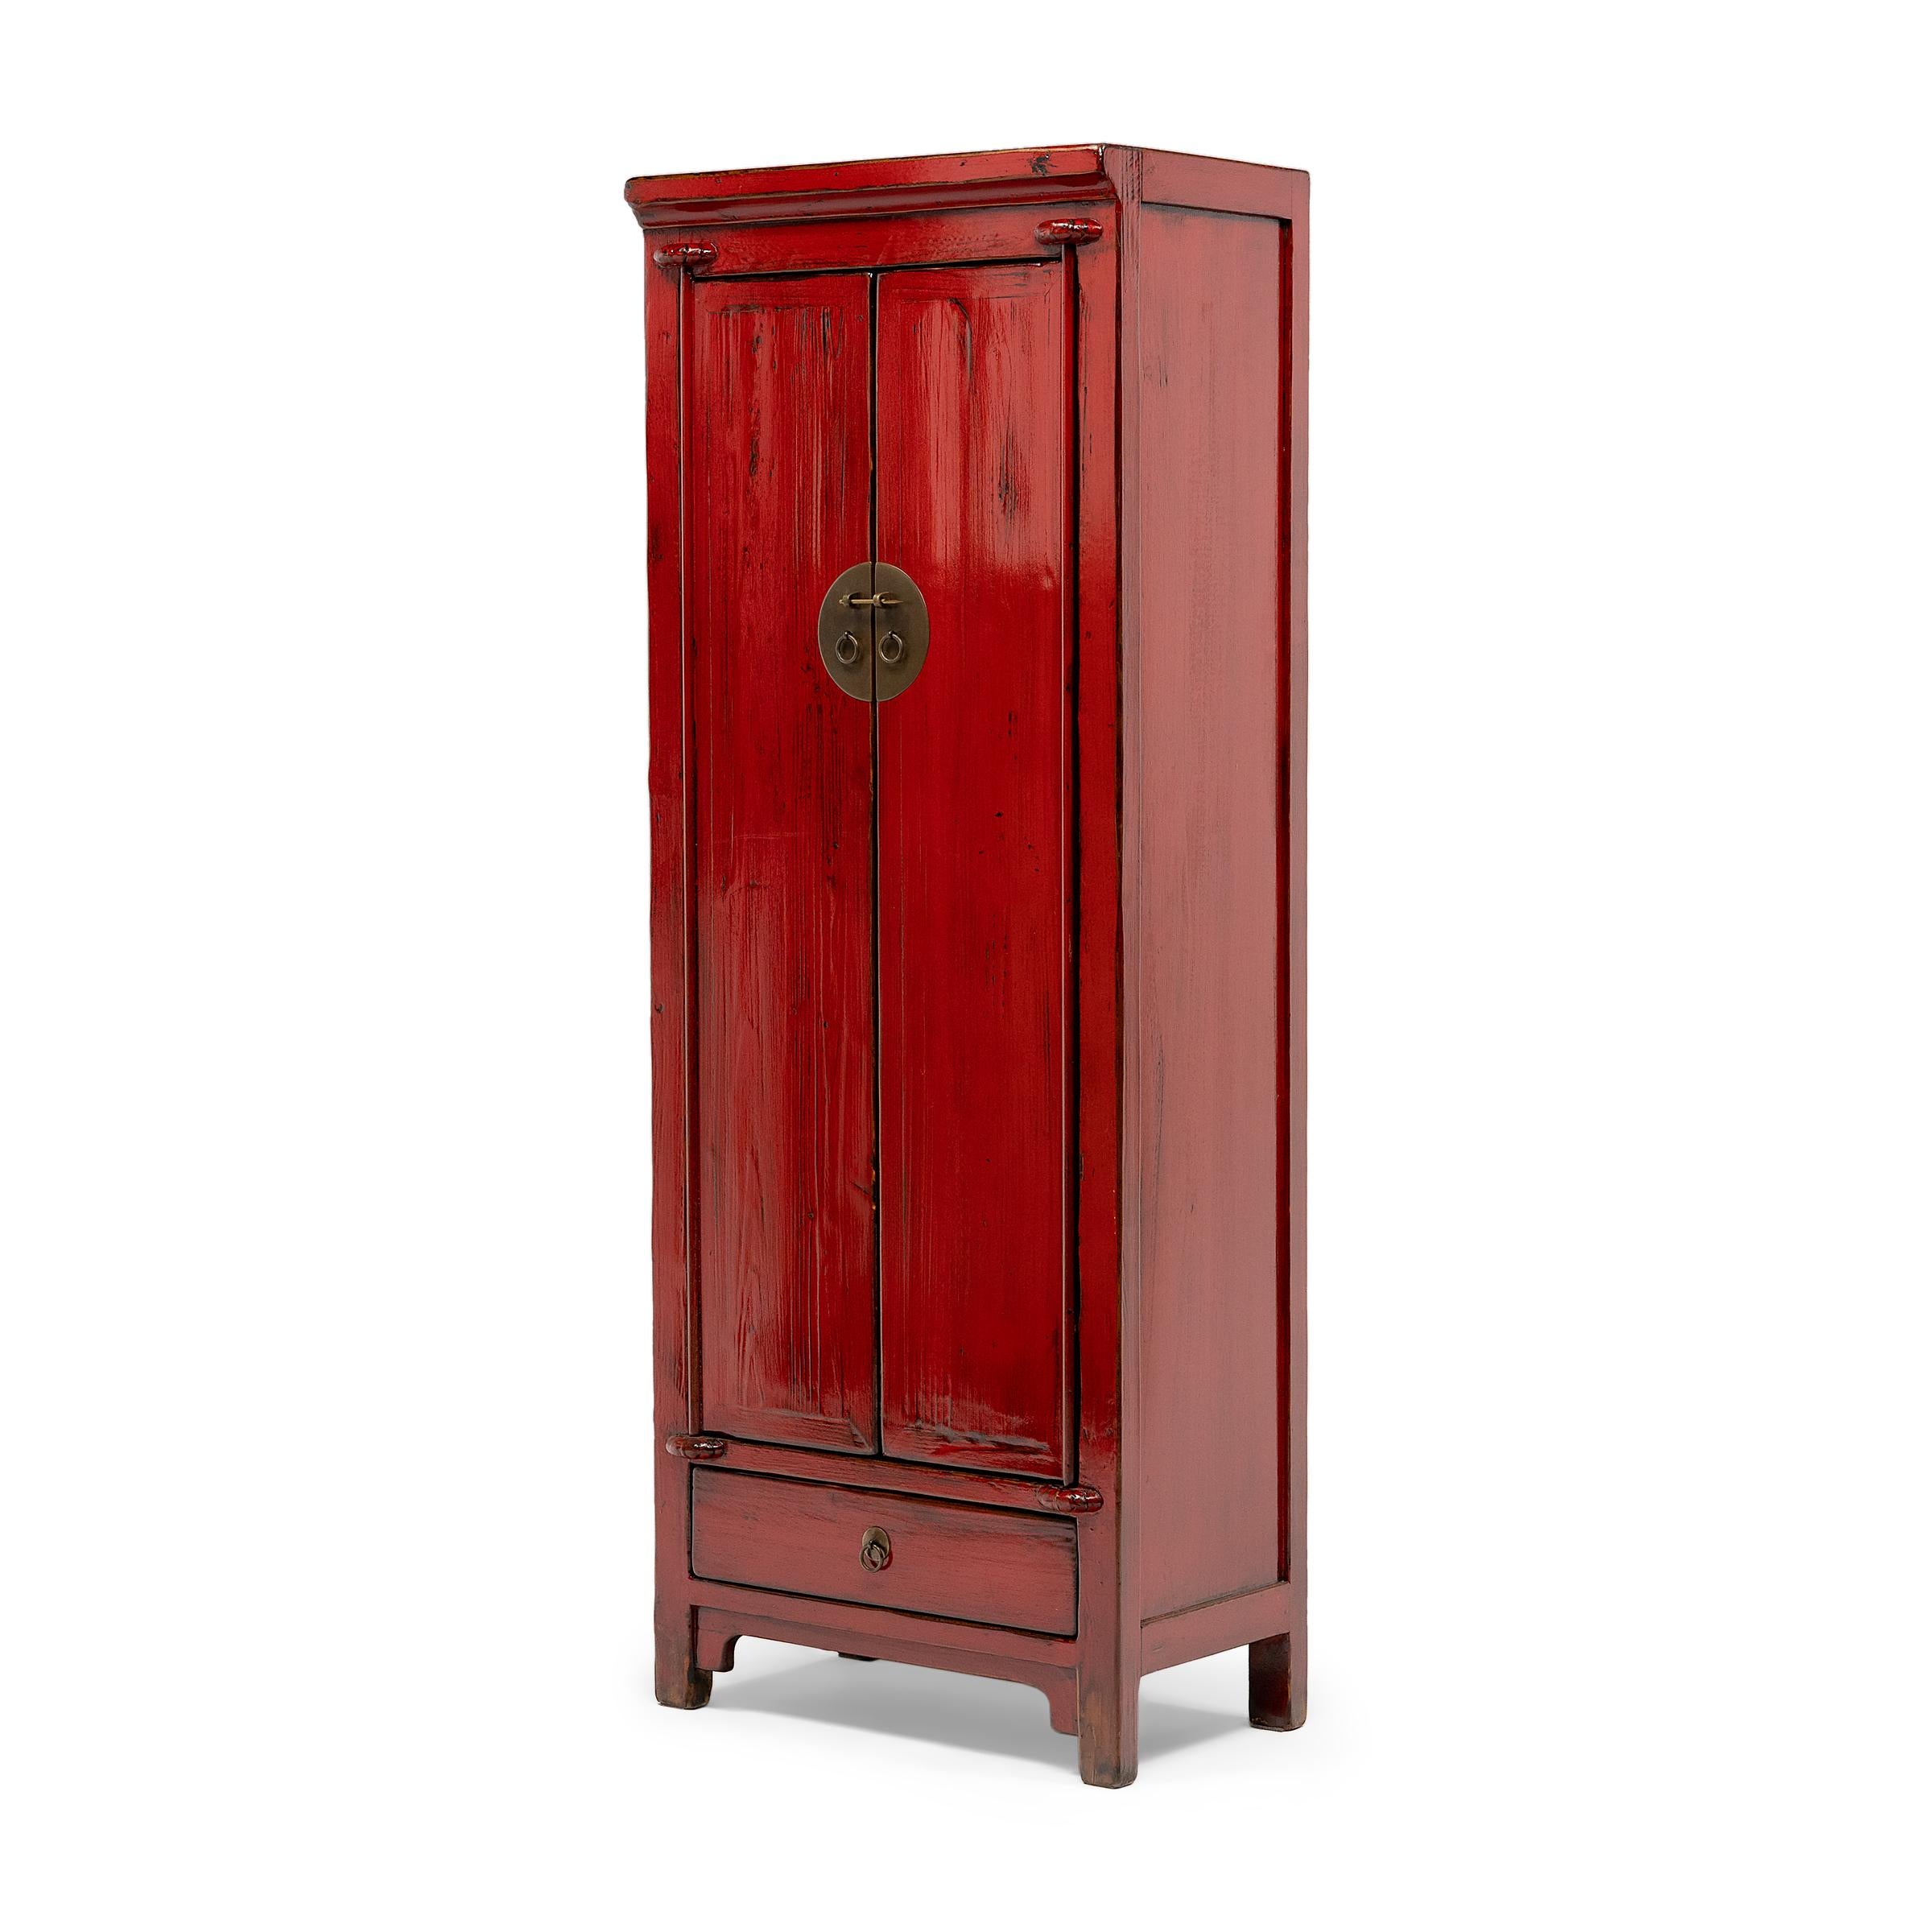 The essence of traditional Chinese furniture is fully expressed in the simplicity and graceful presence of this 18th-century cabinet crafted in the Shanxi province. Made of pine wood with traditional joinery techniques, the narrow cabinet stands